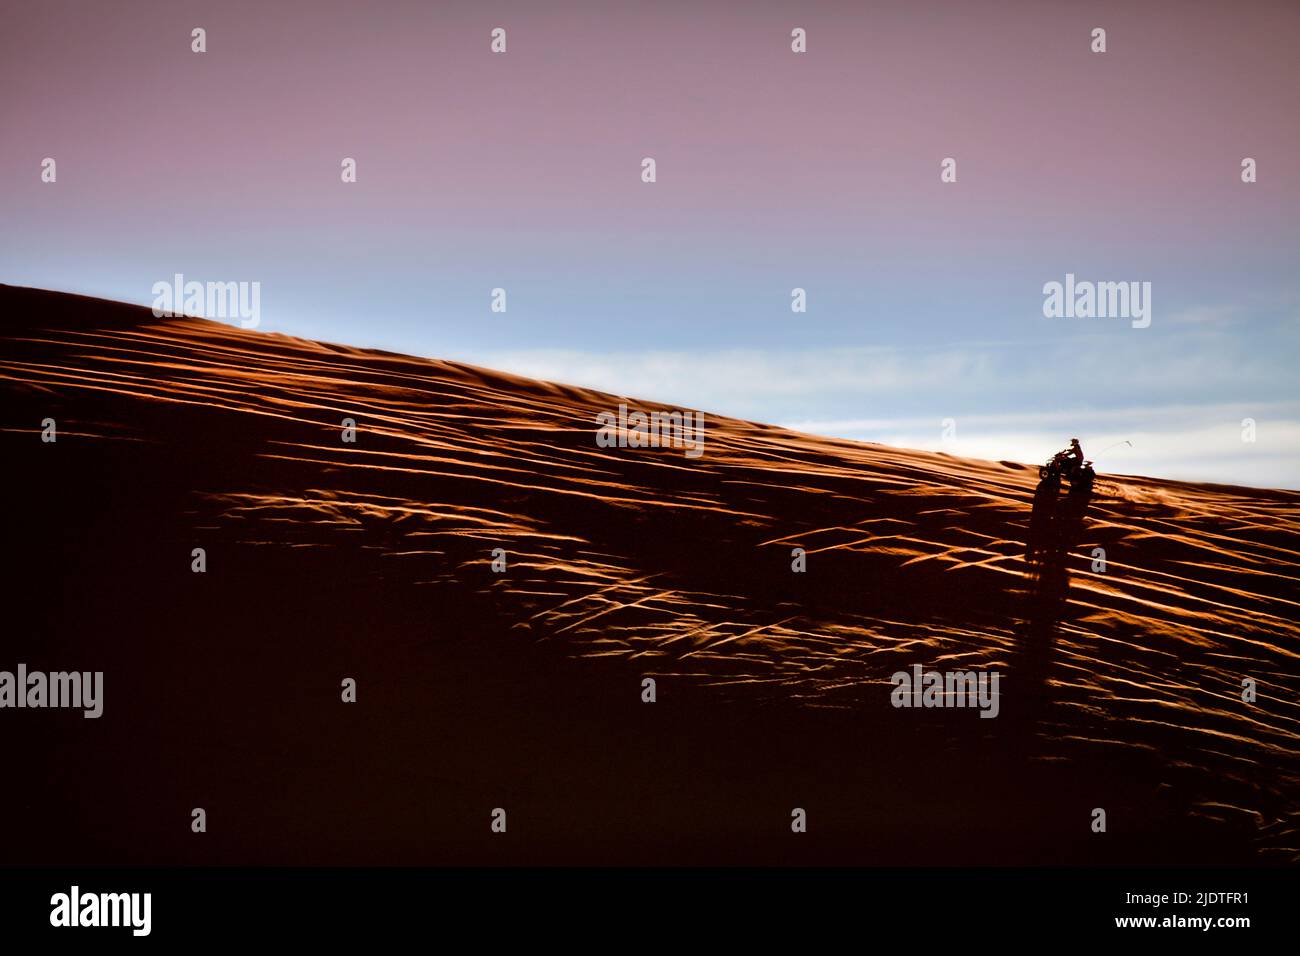 Riding an ATV on the crest of a sand dune at sunset. The dunes at Dumont Dunes Off-Highway Vehicle Area, near Death Valley, are criss-crossed with tir Stock Photo